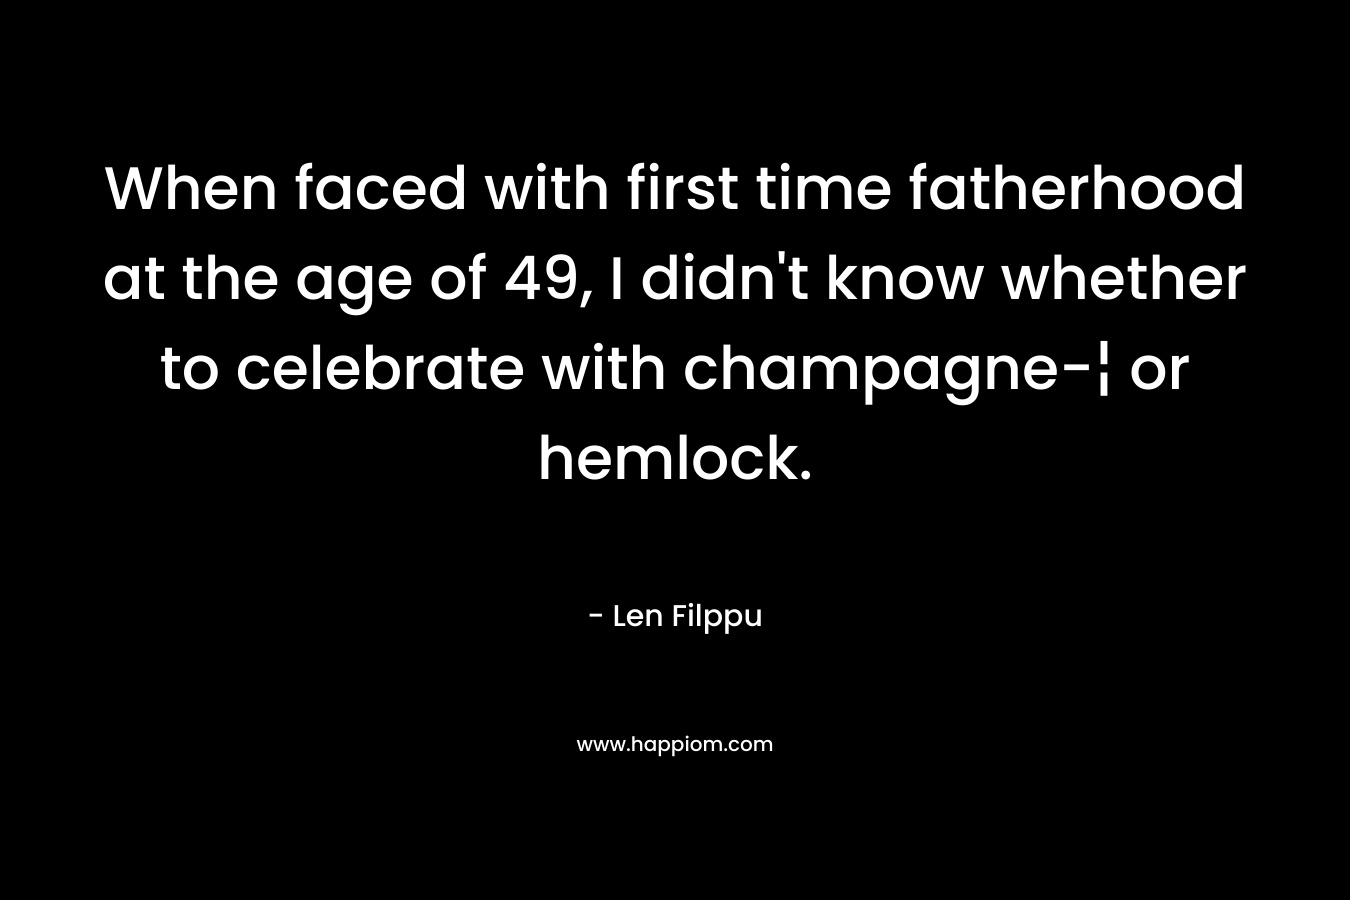 When faced with first time fatherhood at the age of 49, I didn't know whether to celebrate with champagne-¦ or hemlock.